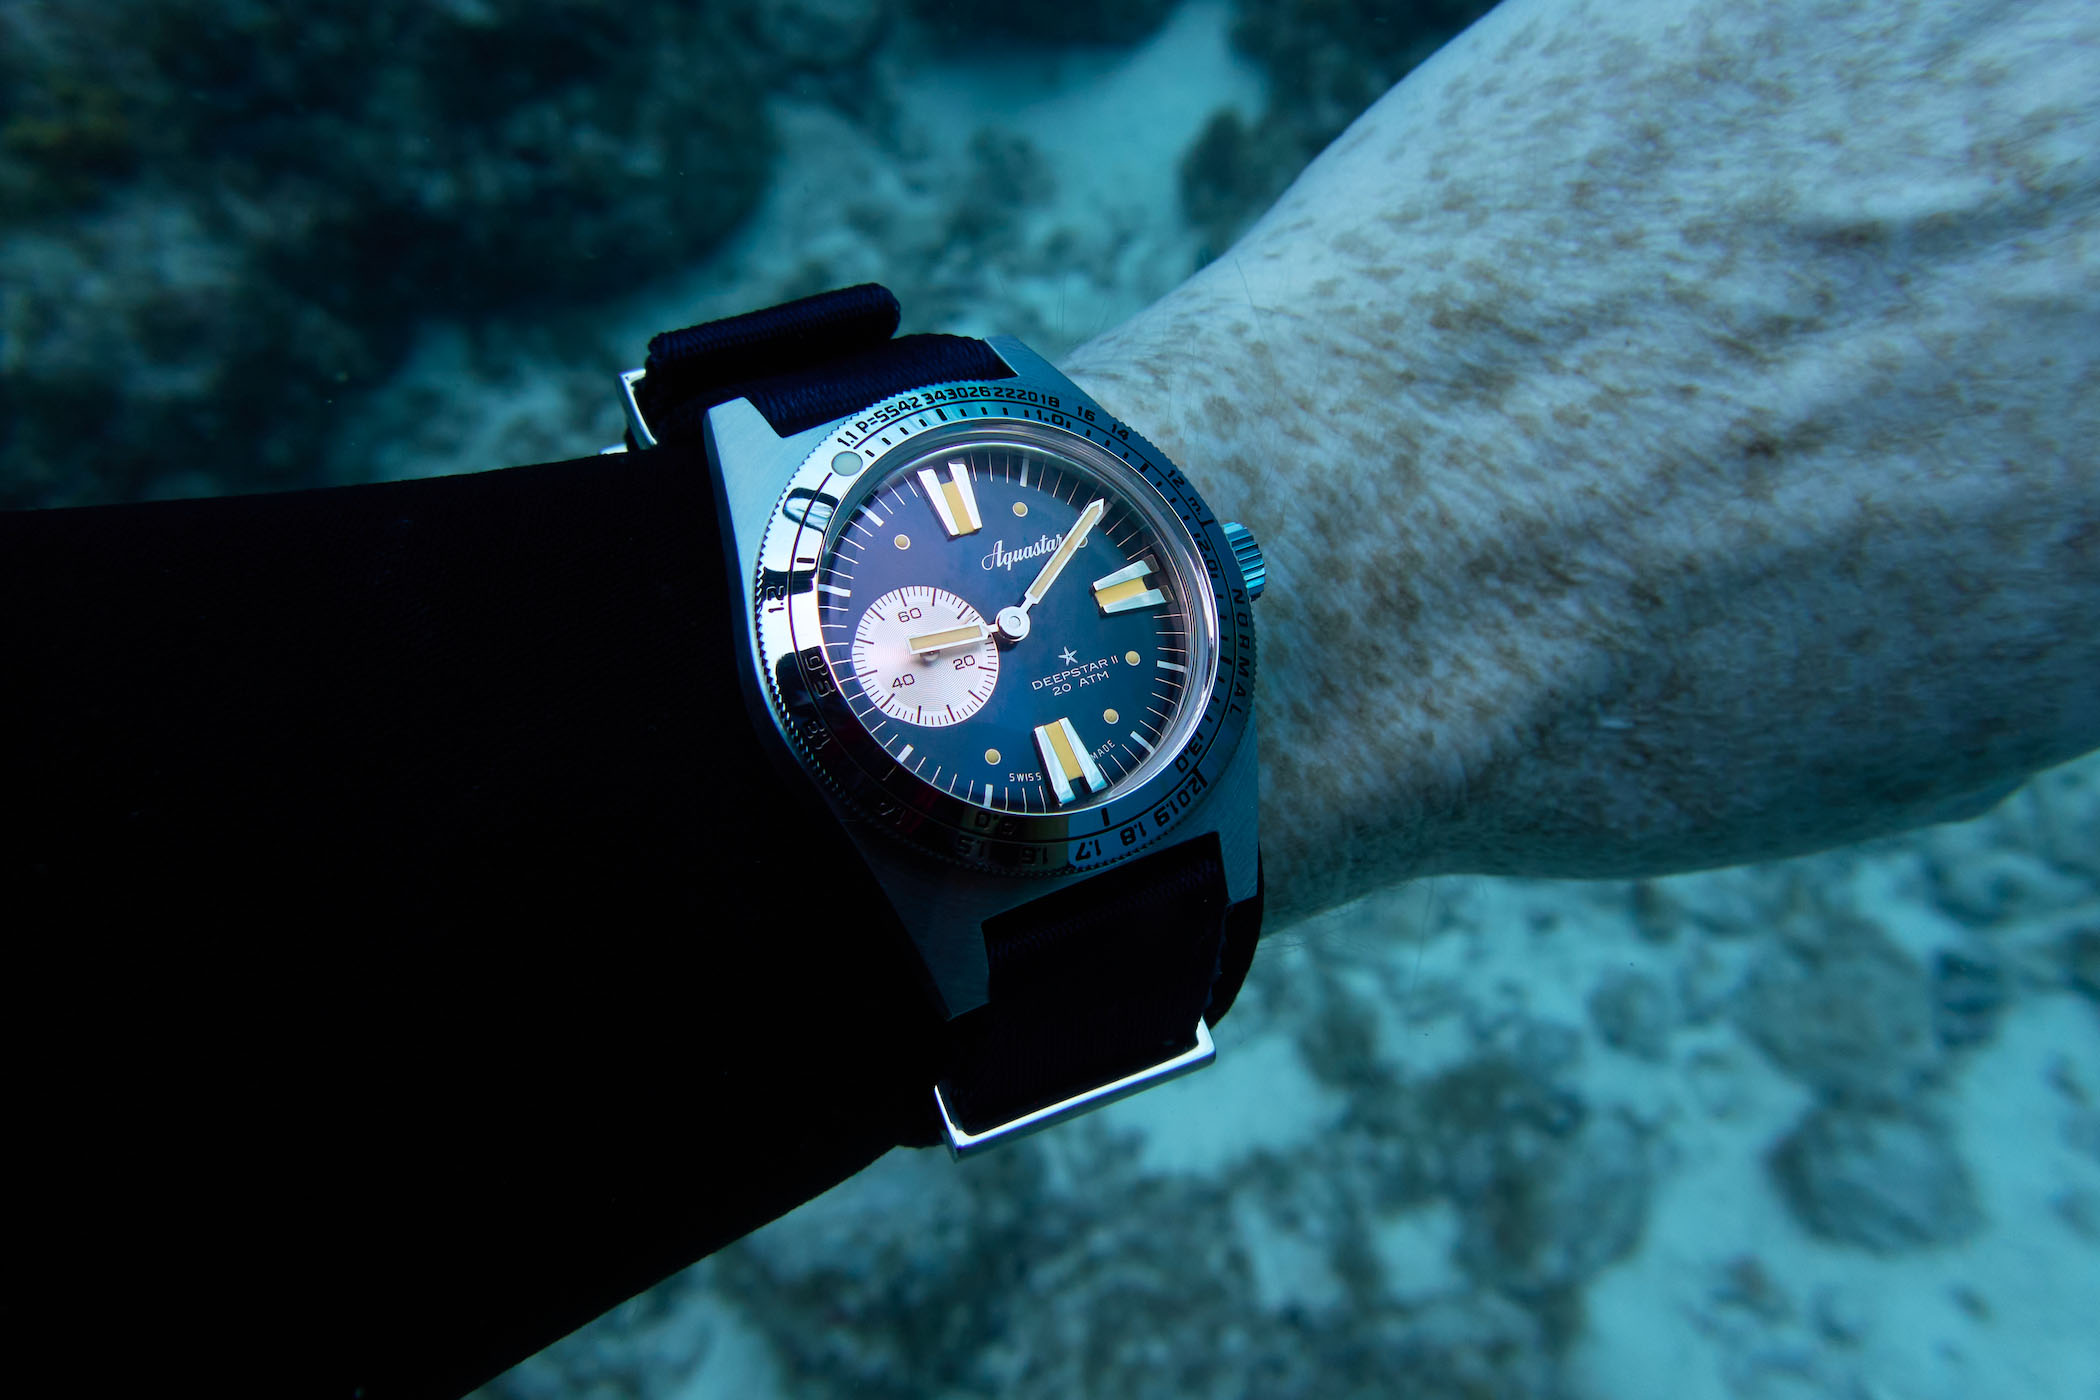 Introducing And Diving With The All-New Aquastar Deepstar II